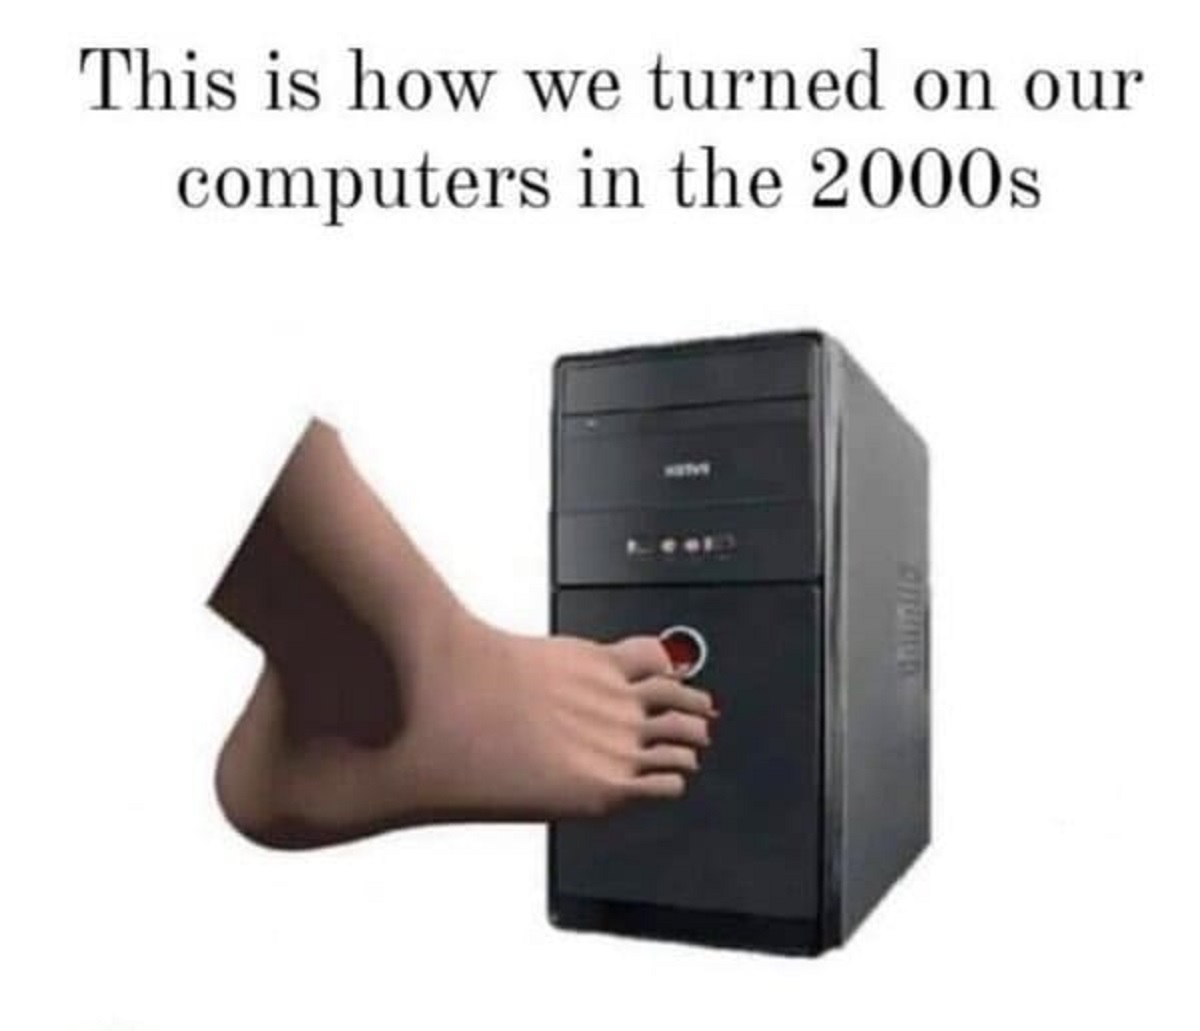 we turned on our computers in the 2000s - This is how we turned on our computers in the 2000s